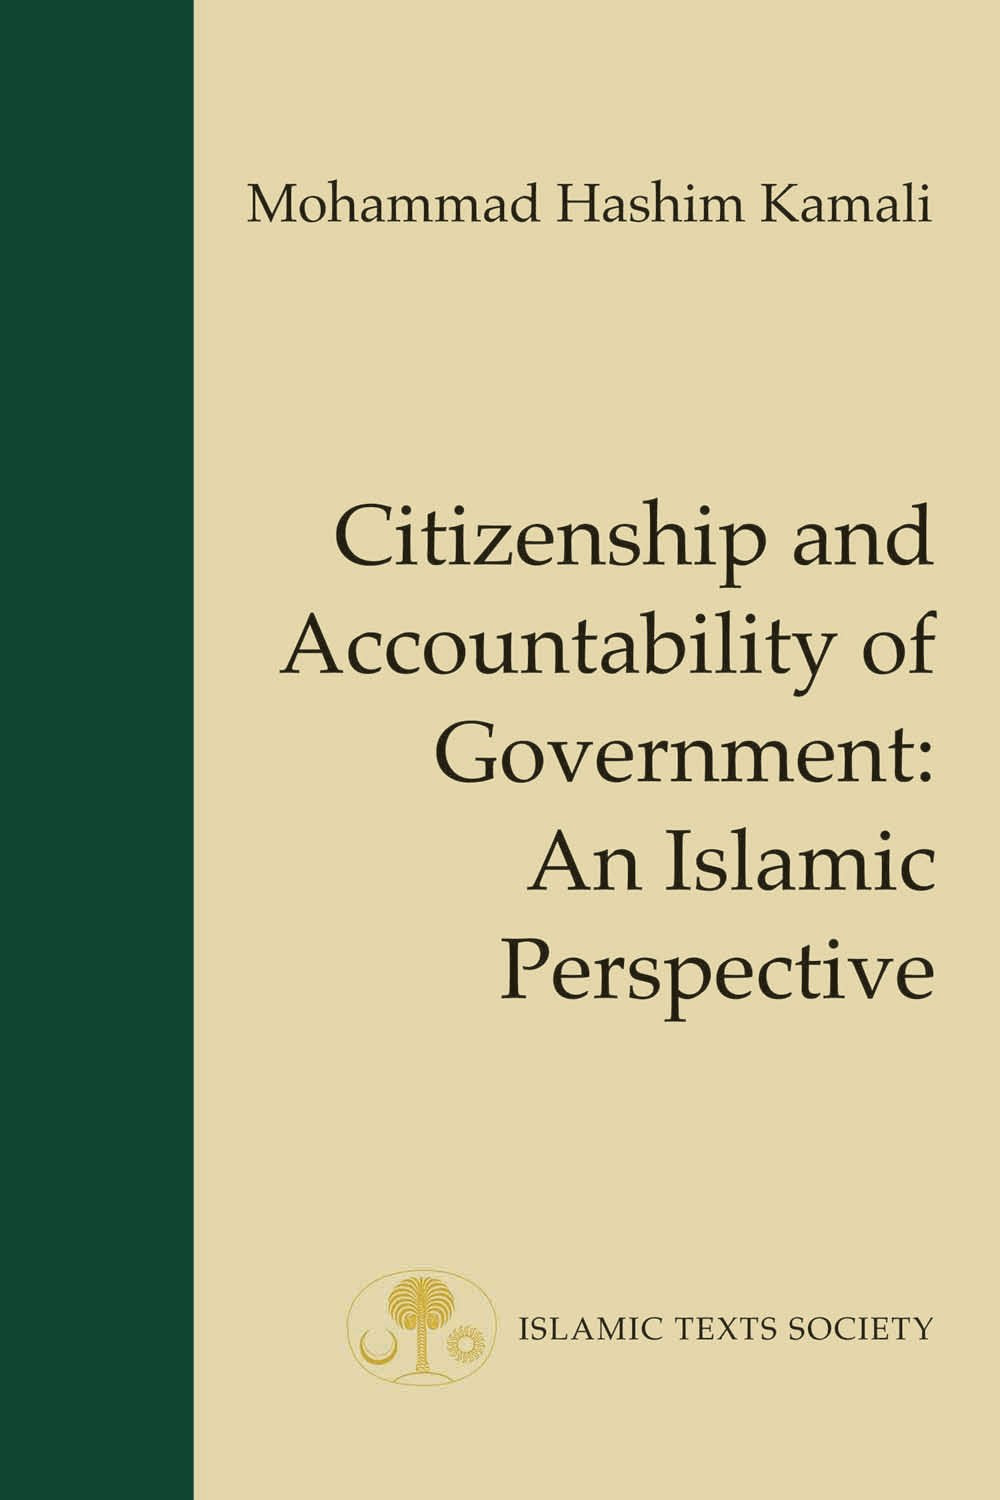 Citizenship and Accountability of Government: An Islamic Perspective